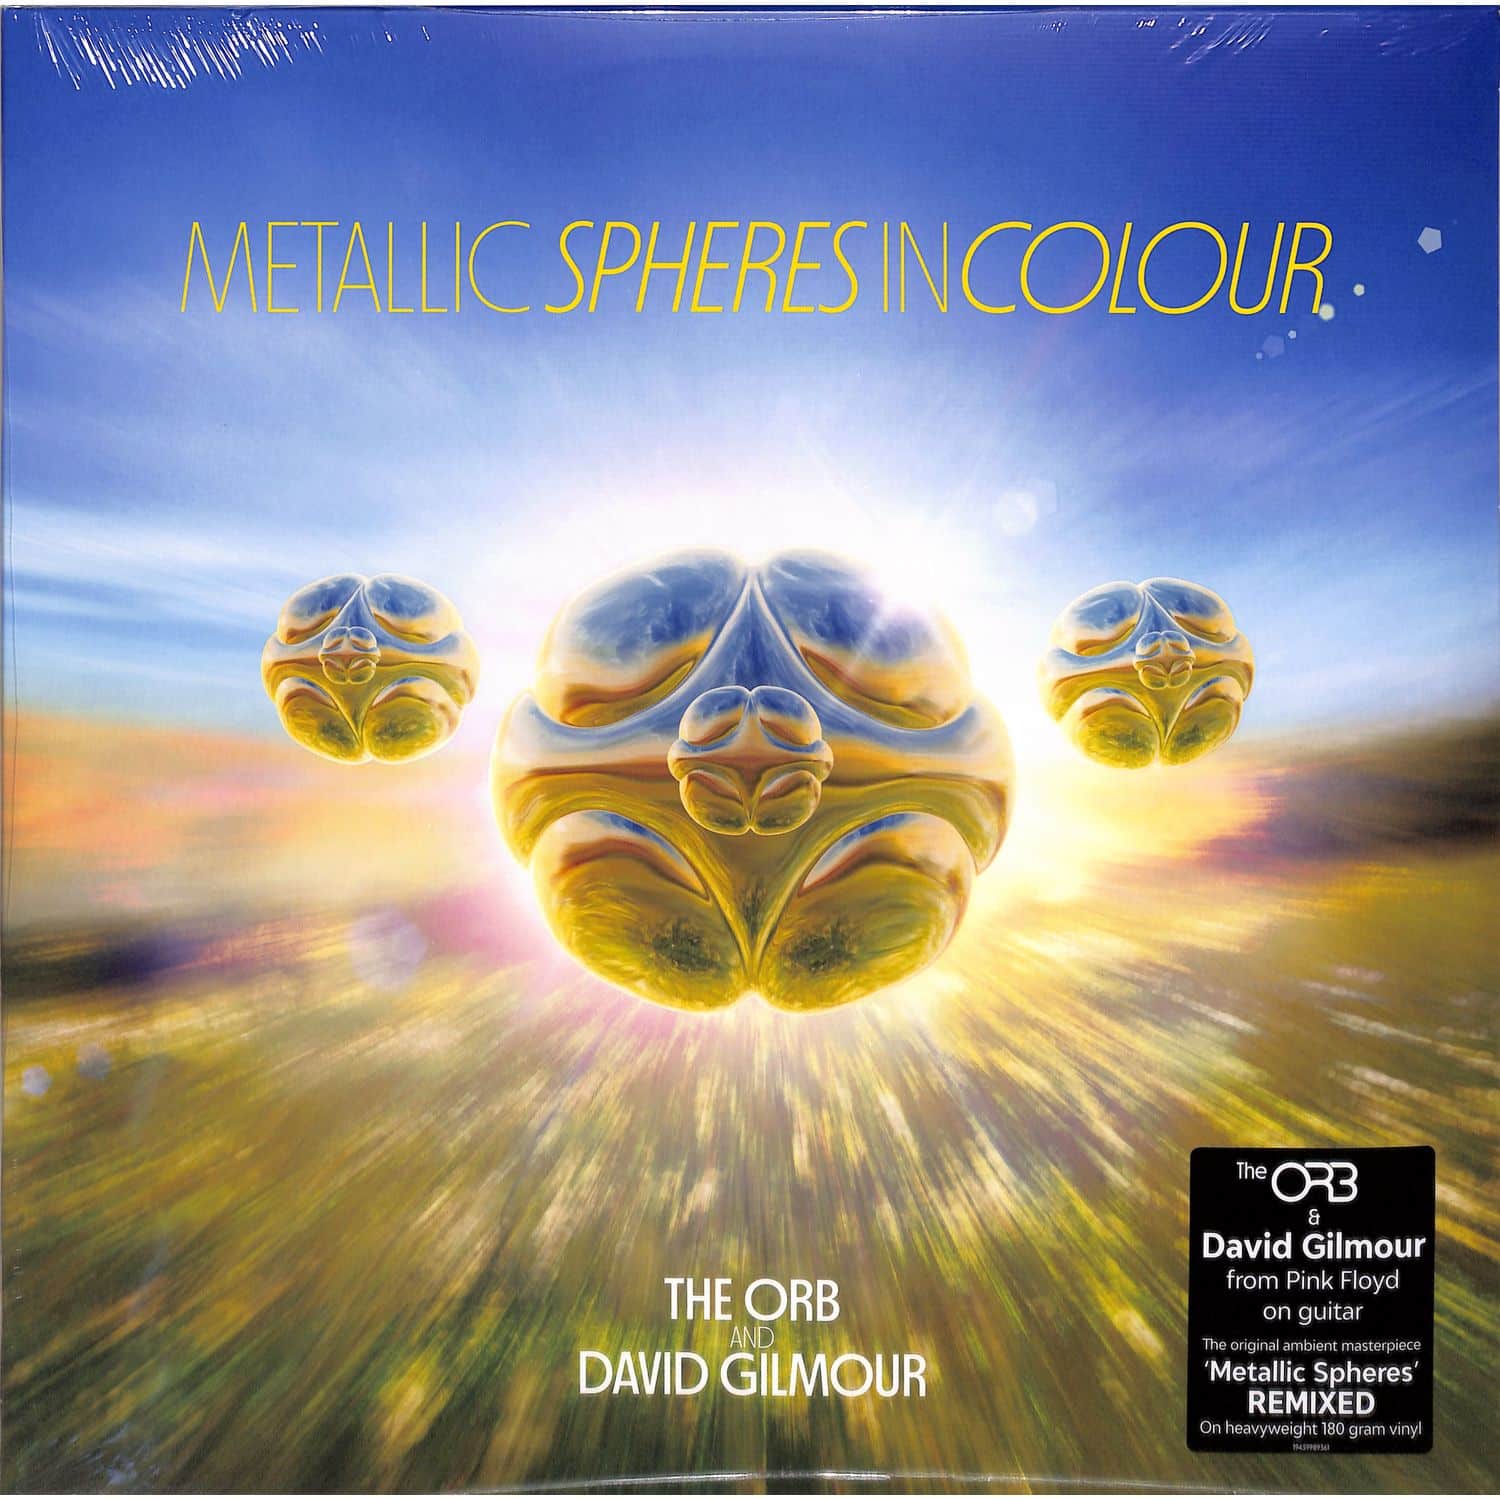 The Orb and David Gilmour - METALLIC SPHERES IN COLOUR 